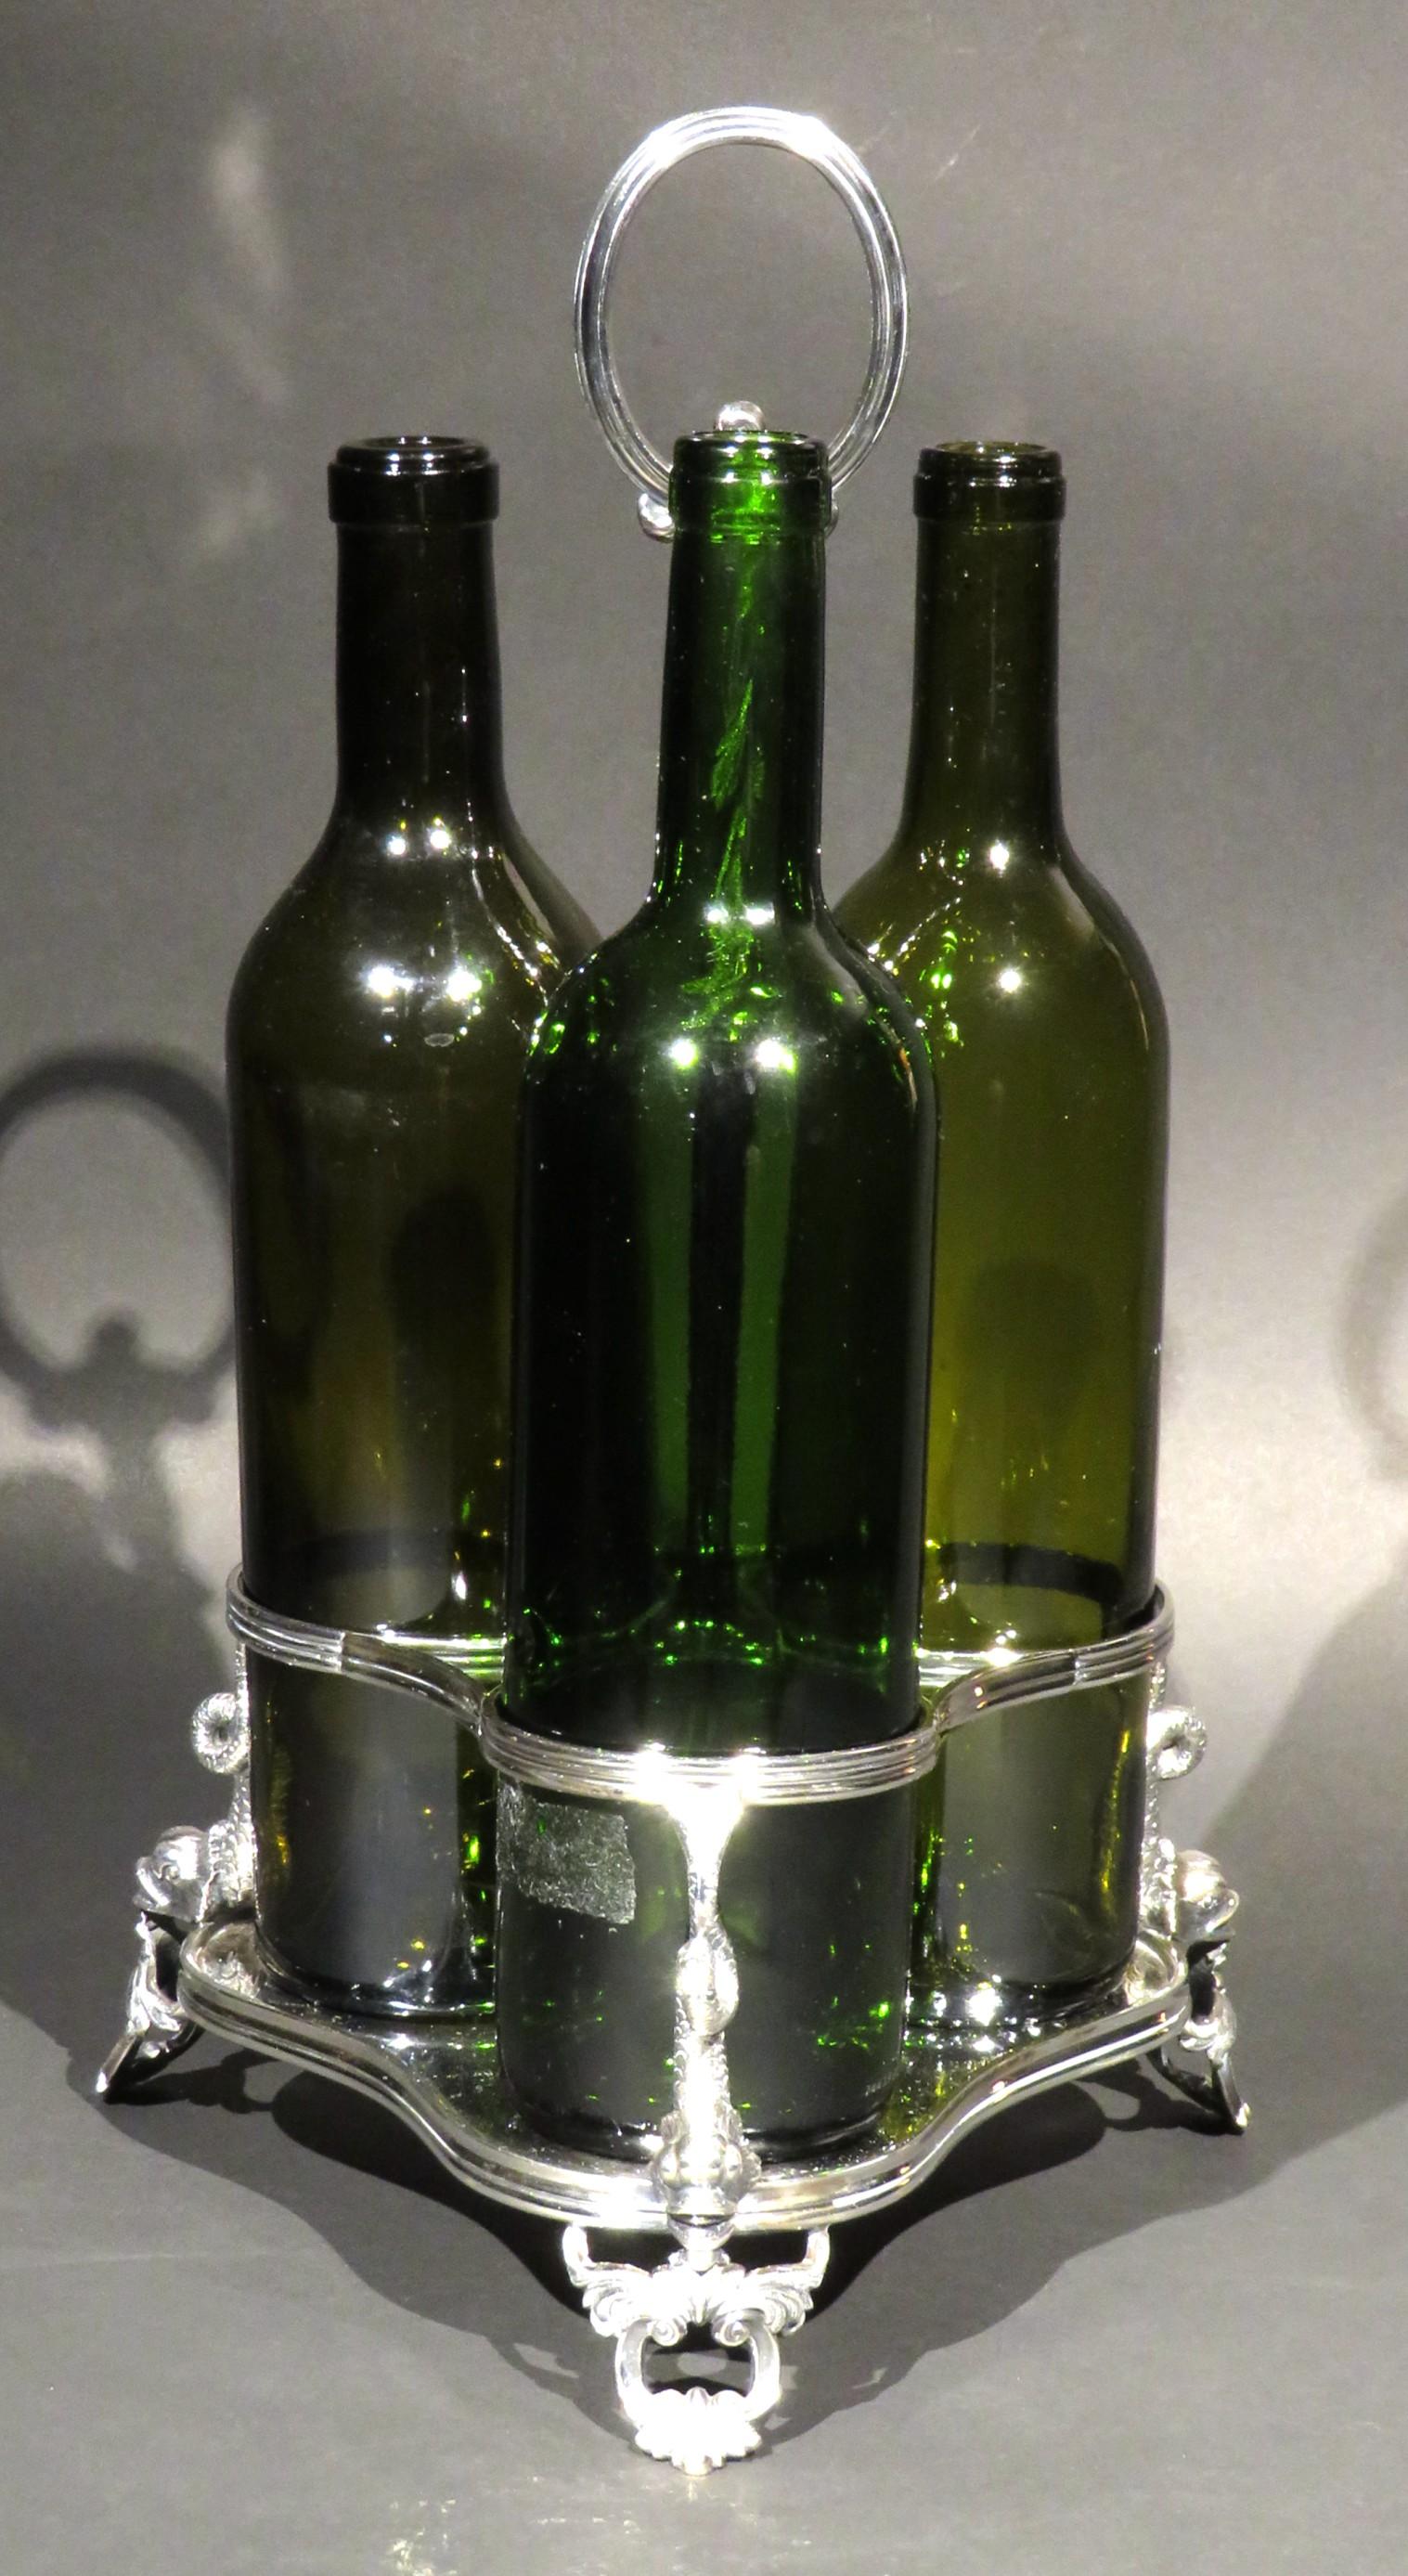 Victorian Late 19th Century Silver Plated Wine Bottle Carrier / Caddy, U.K. Circa 1890 For Sale